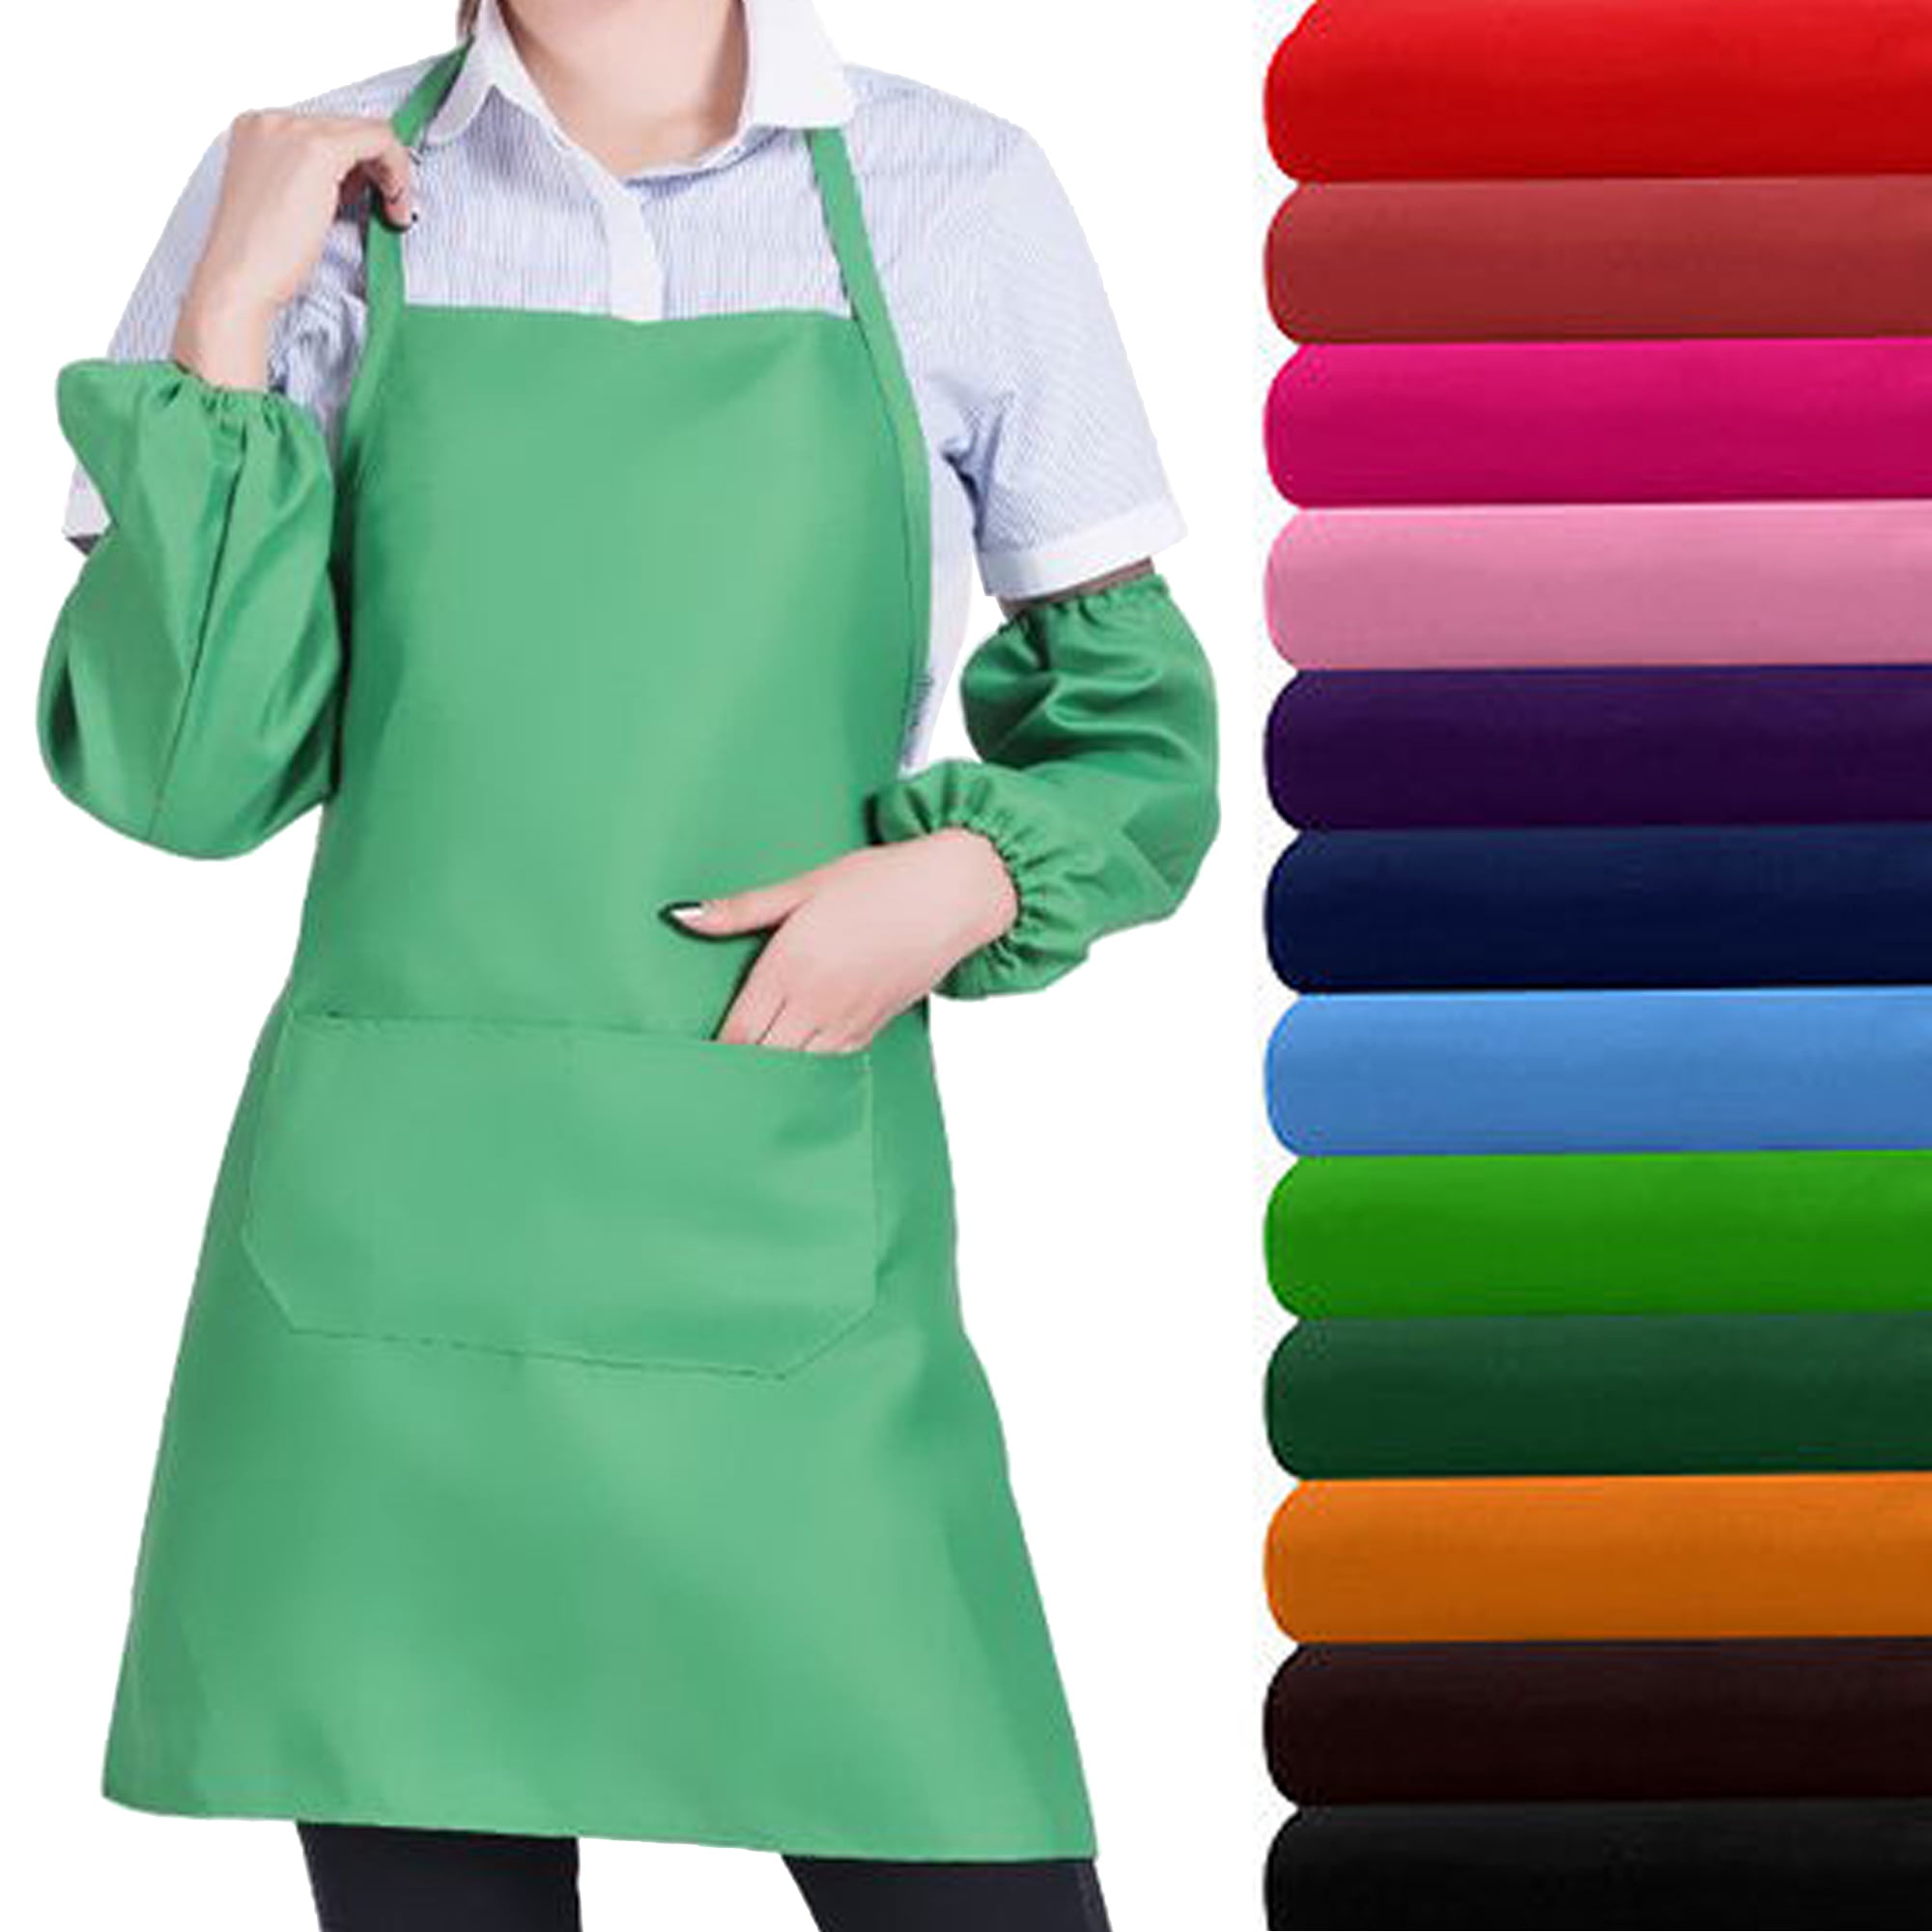 LADIES TABARD WOMENS TABBARD APRON WITH POCKET KITCHEN CLEANING CHEF WORK WEAR 